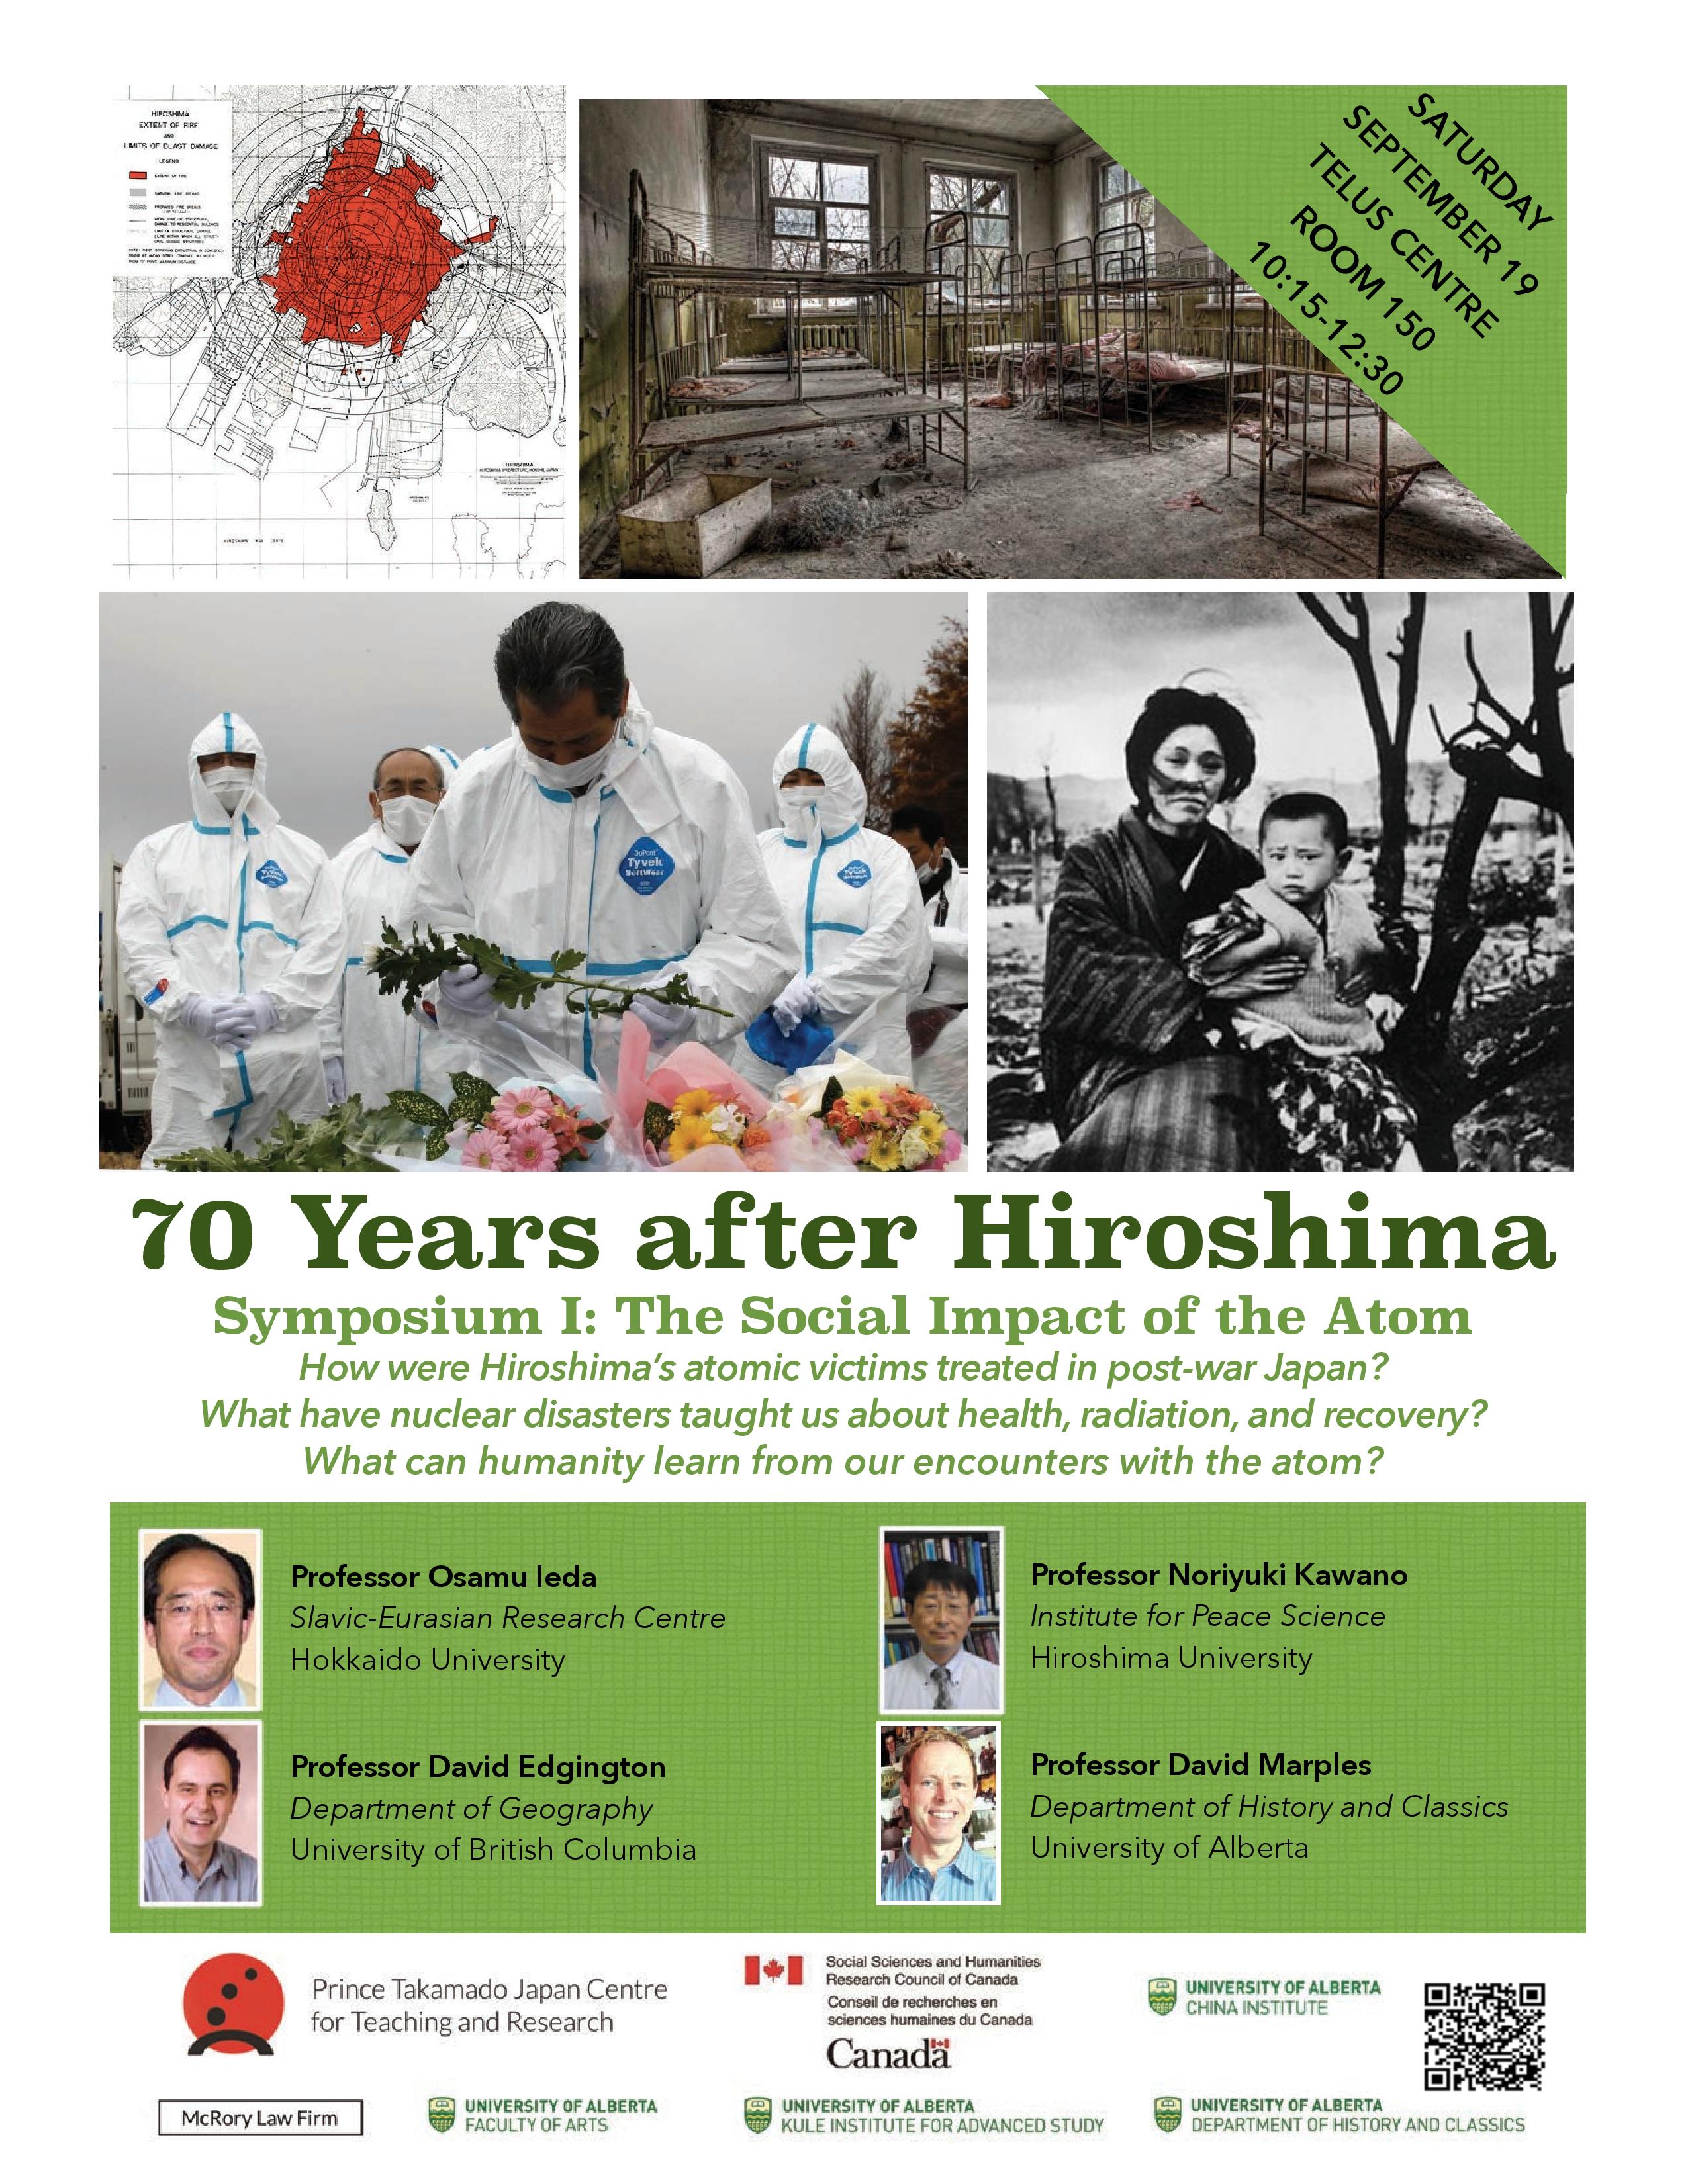 70 Years After Hiroshima event poster